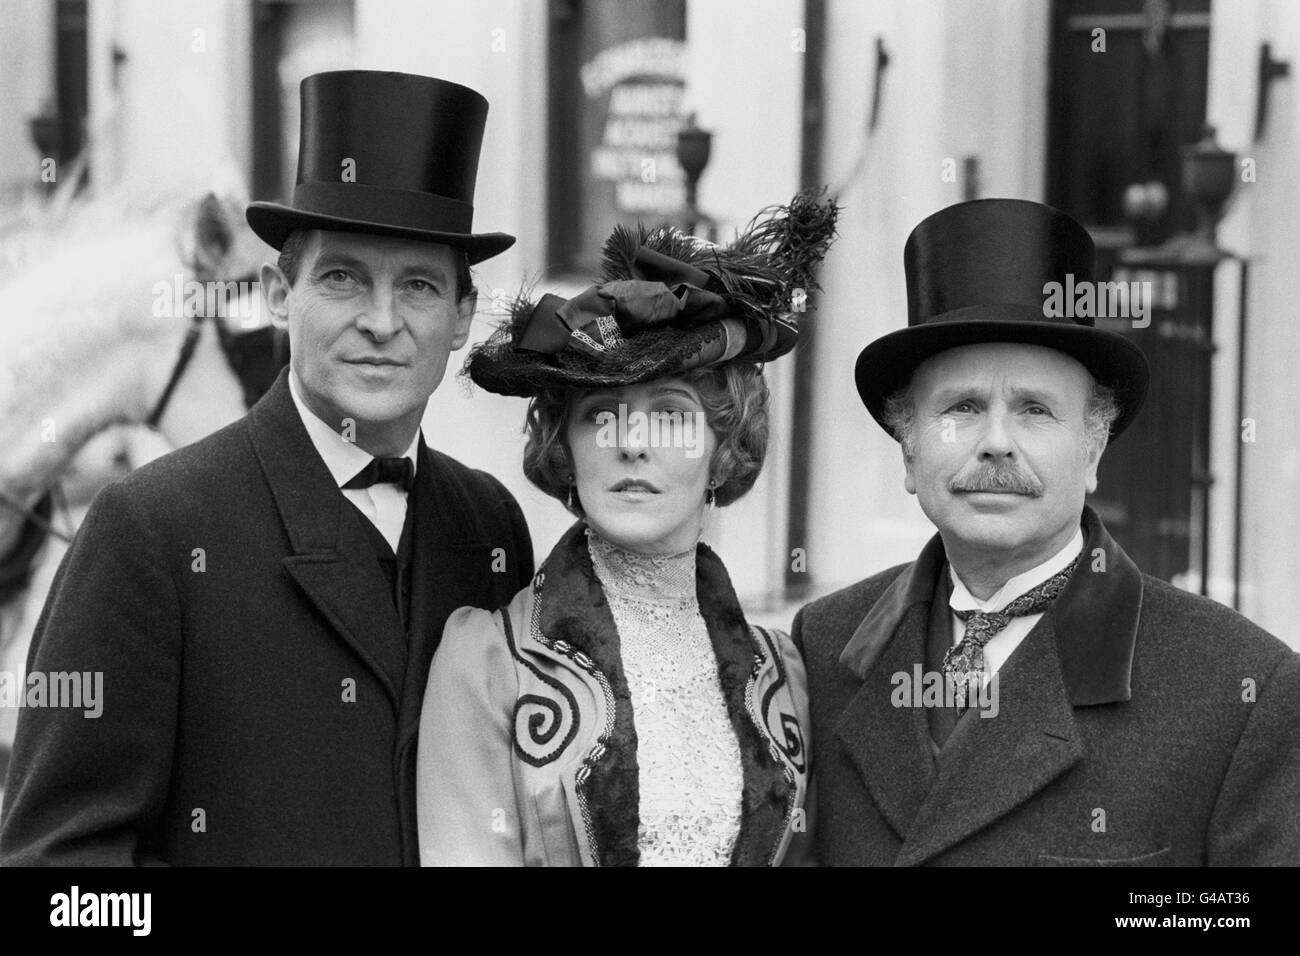 Actor Edward Hardwicke (r) who plays Dr Watson in the Granada TV series 'The Return of Sherlock Holmes' on set in Manchester with Jeremy Brett (l) who plays Sherlock Holmes, and Patricia Hodge, who plays Lady Hilda Trelawney Hope, during filming of the episode 'The Adventure of the Second Stain'. Stock Photo